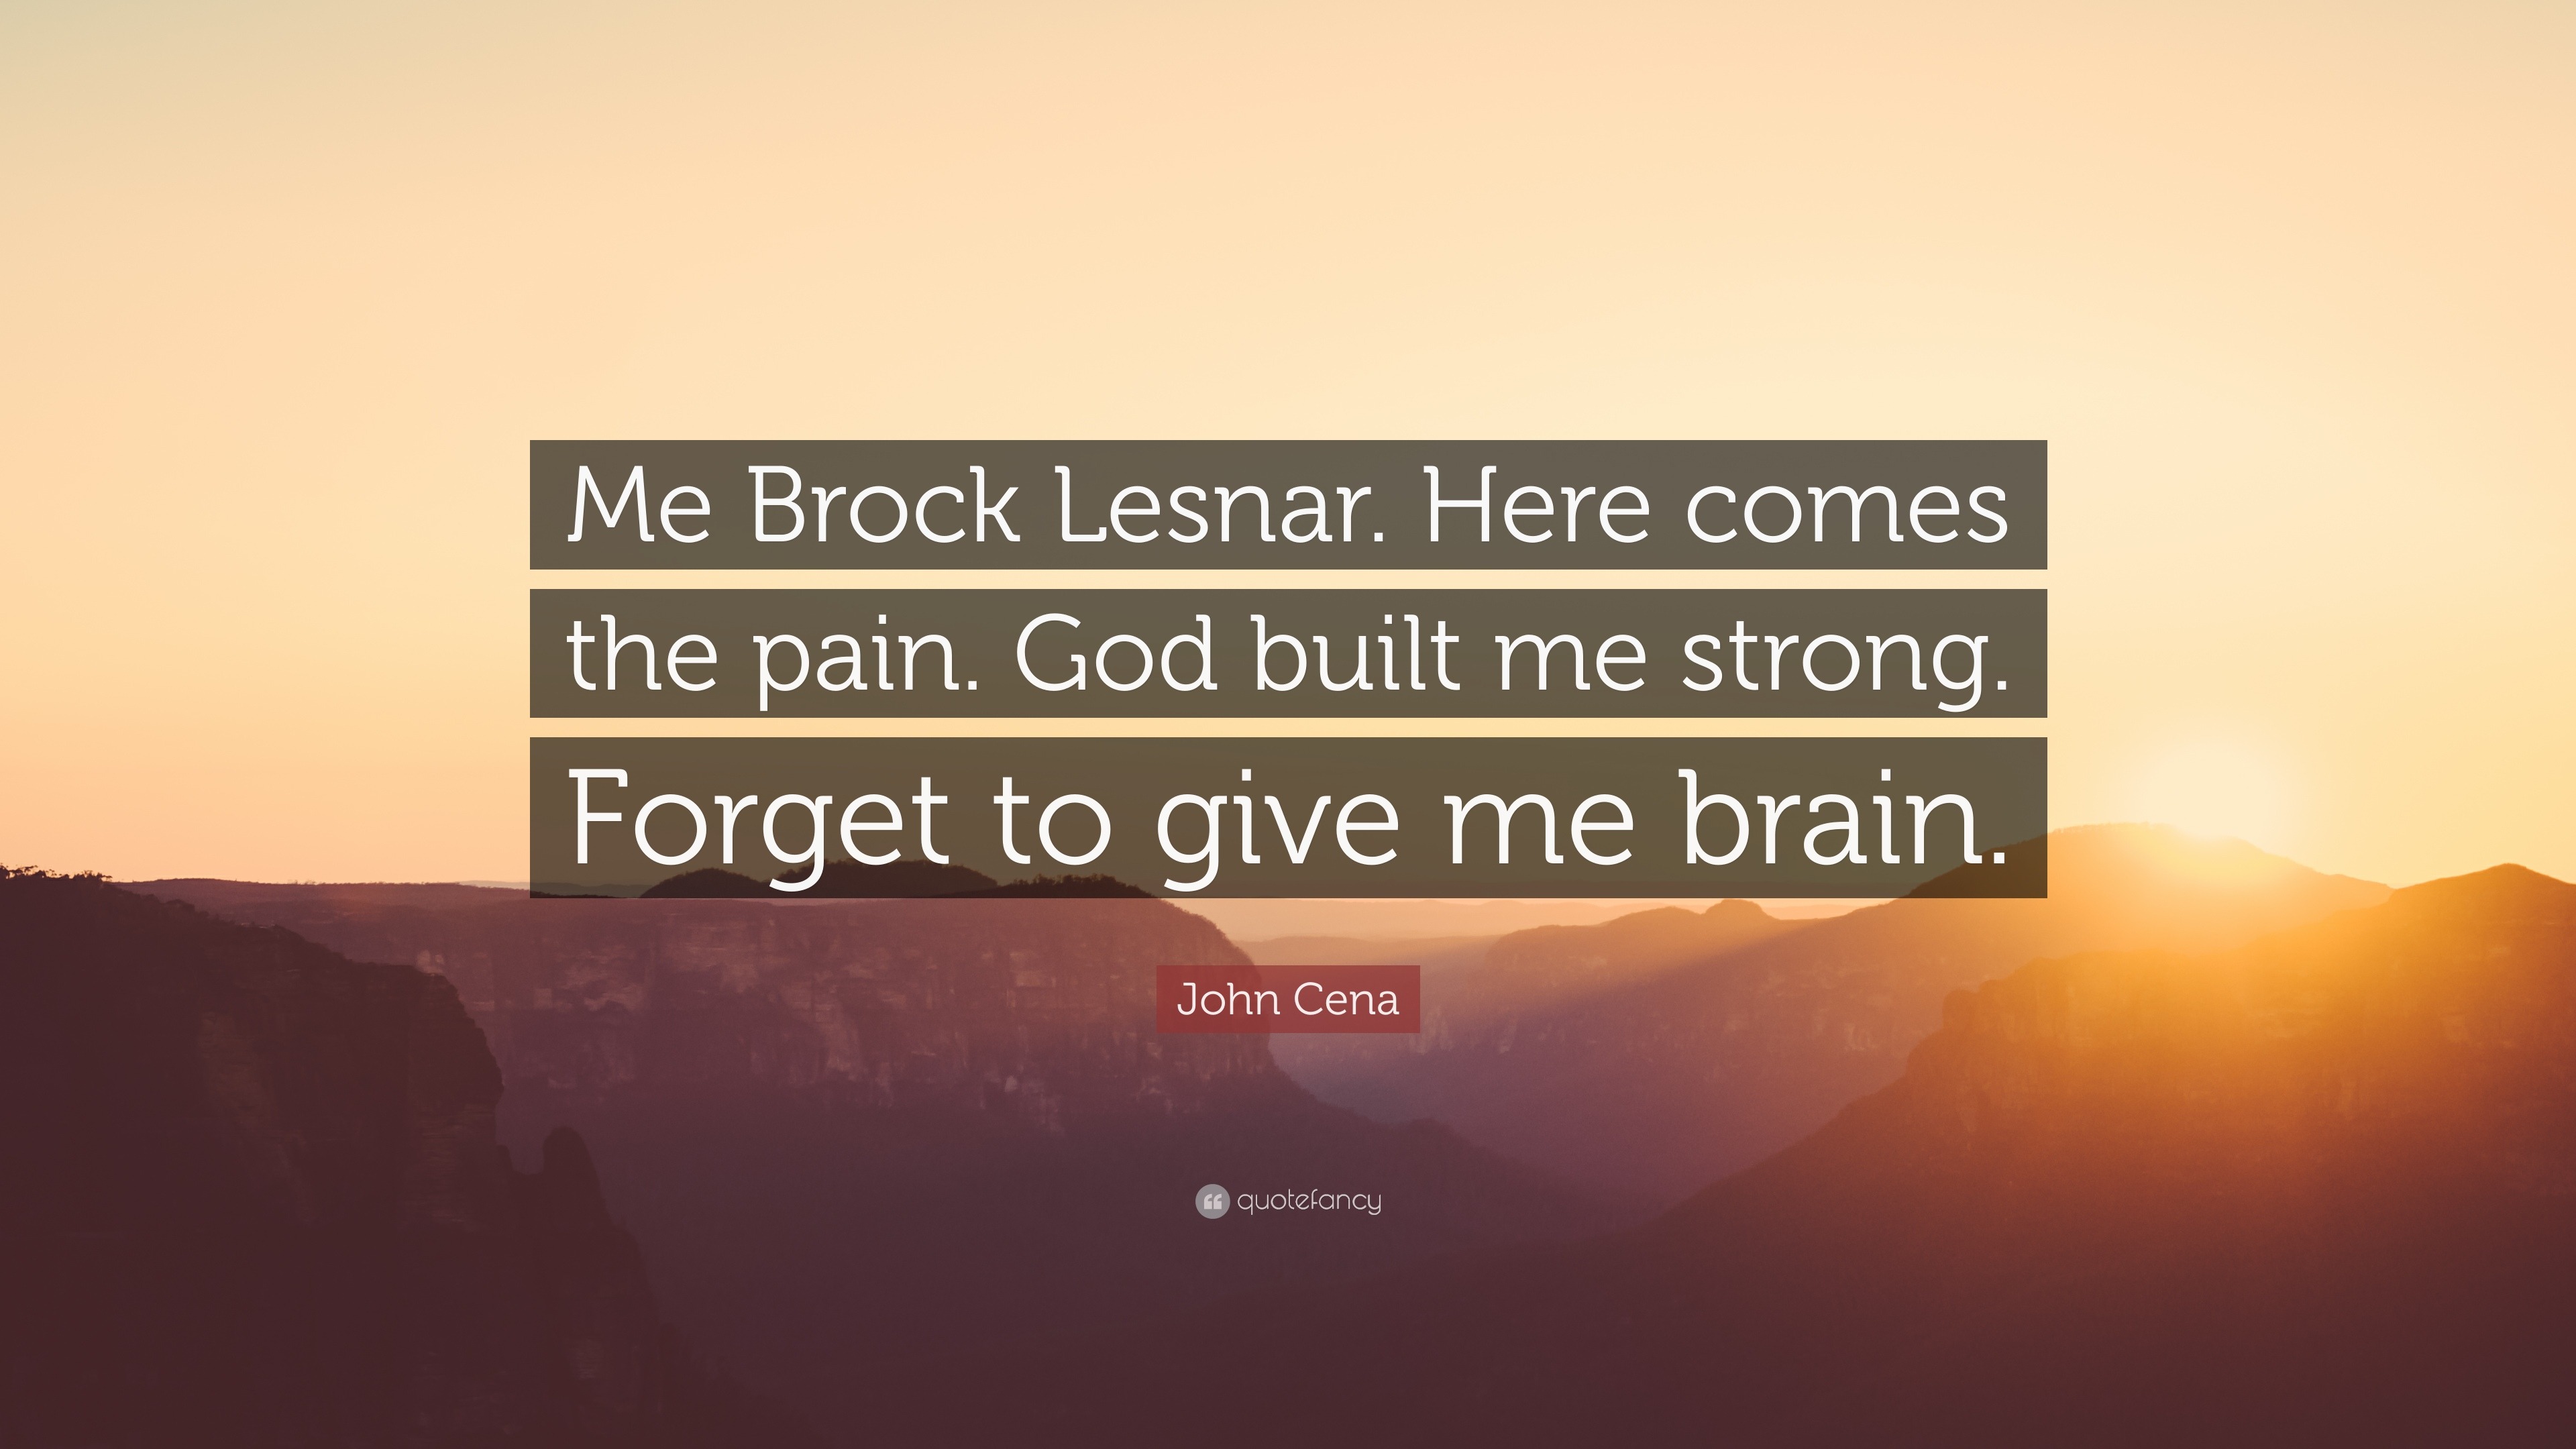 John Cena Quote: “Me Brock Lesnar. Here comes the pain. God built me  strong. Forget to